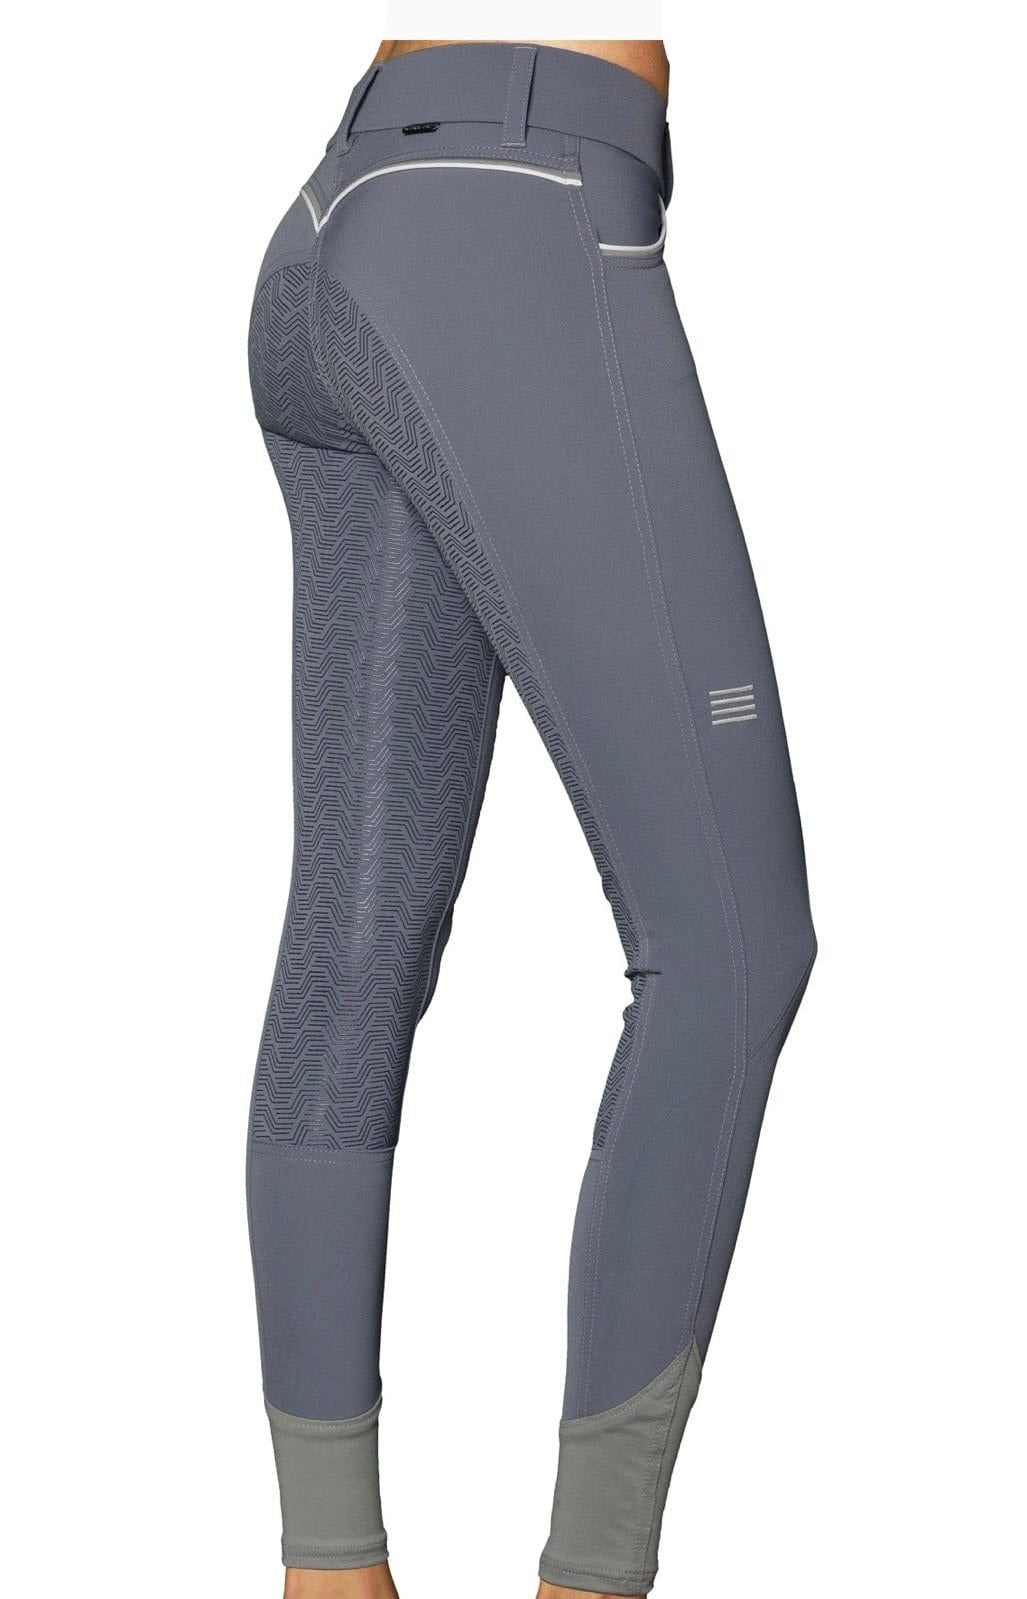 GhoDho Breeches GhoDho Adena T-600 Style Full Seat Breeches - Slate equestrian team apparel online tack store mobile tack store custom farm apparel custom show stable clothing equestrian lifestyle horse show clothing riding clothes horses equestrian tack store